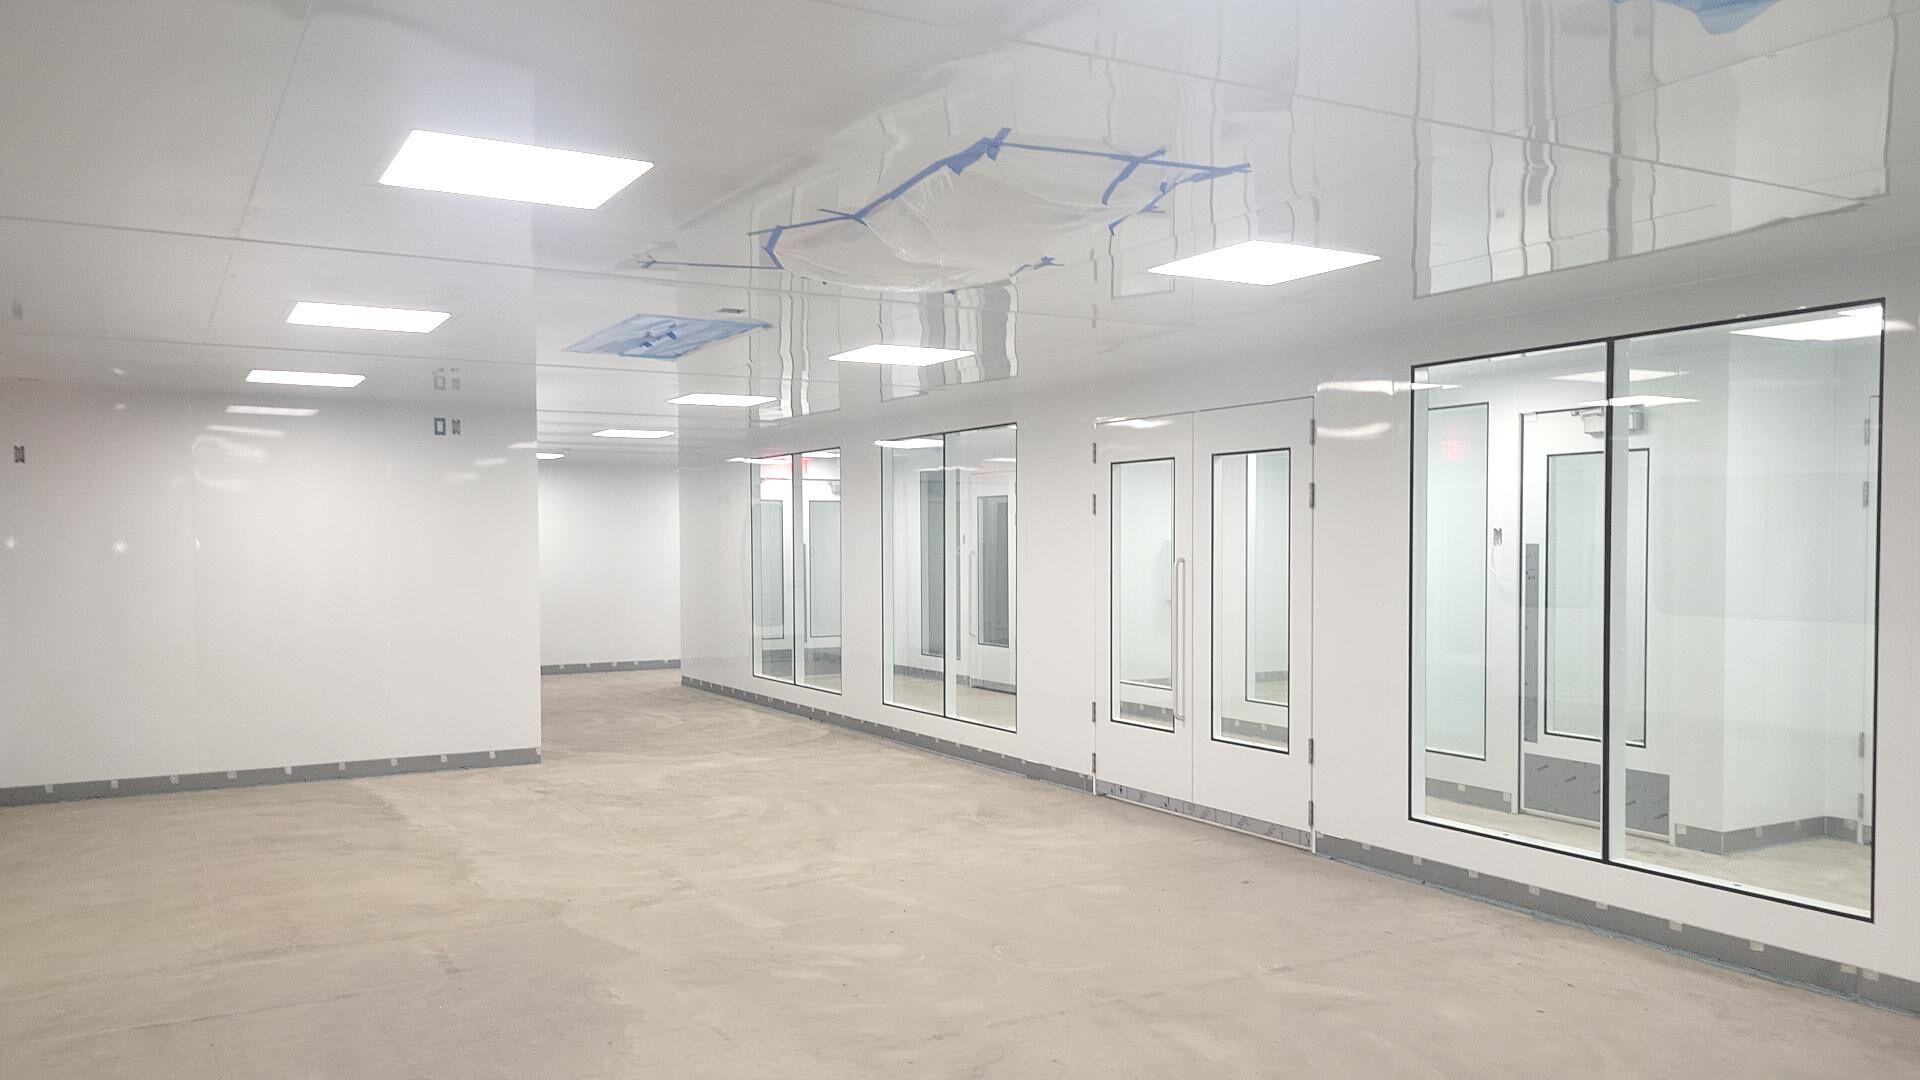 _TOP 5 MECART CLEANROOM PROJECTS OF 2022 1920 x 1080 (5)